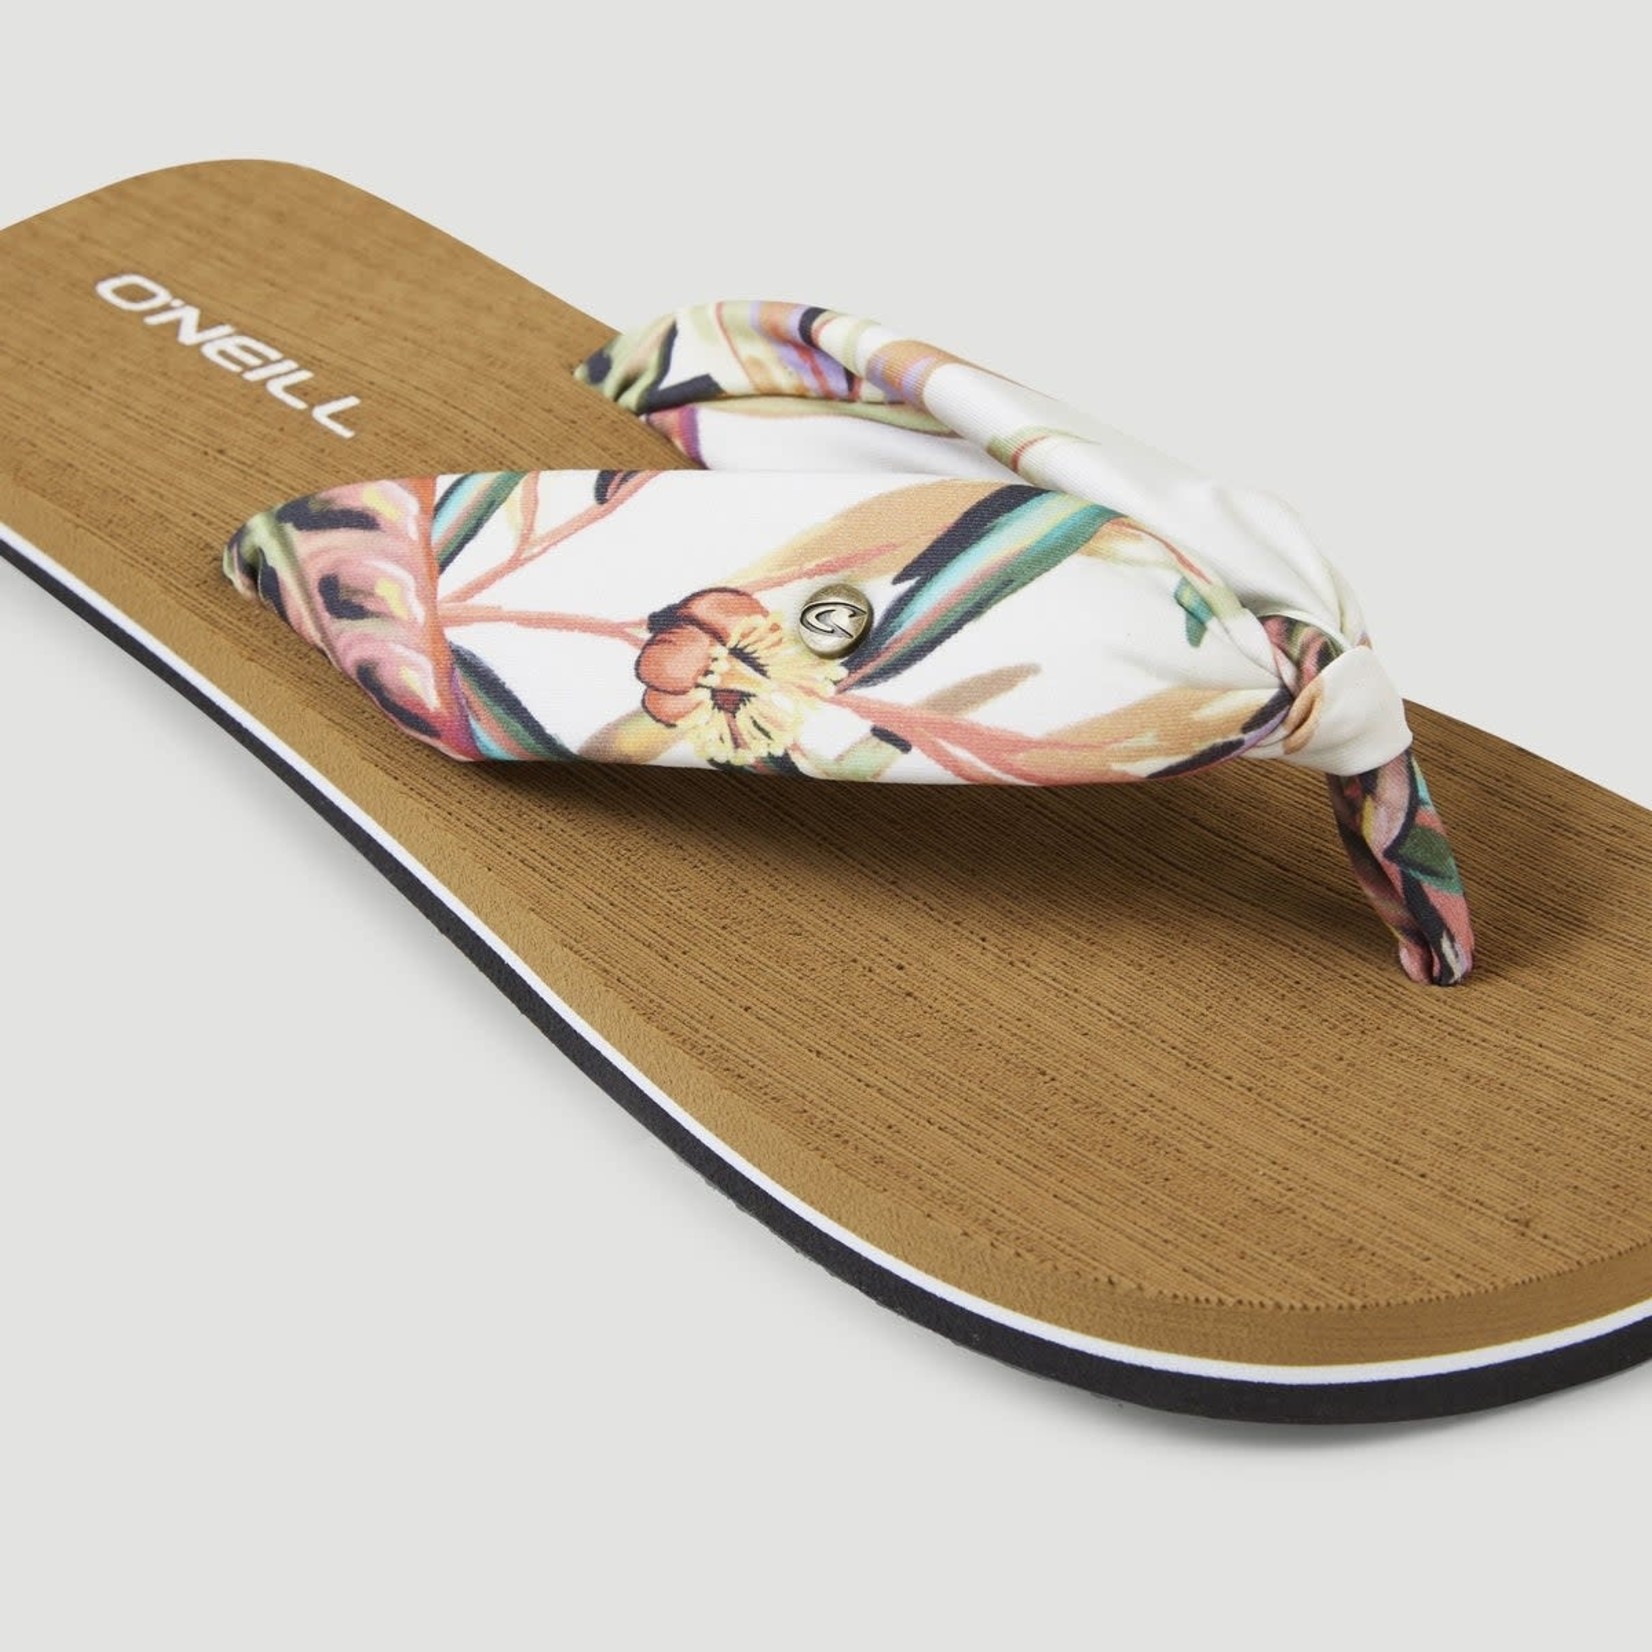 ONEILL DITSY SUN BLOOM™ Tropical  - Sandales - O'NEILL